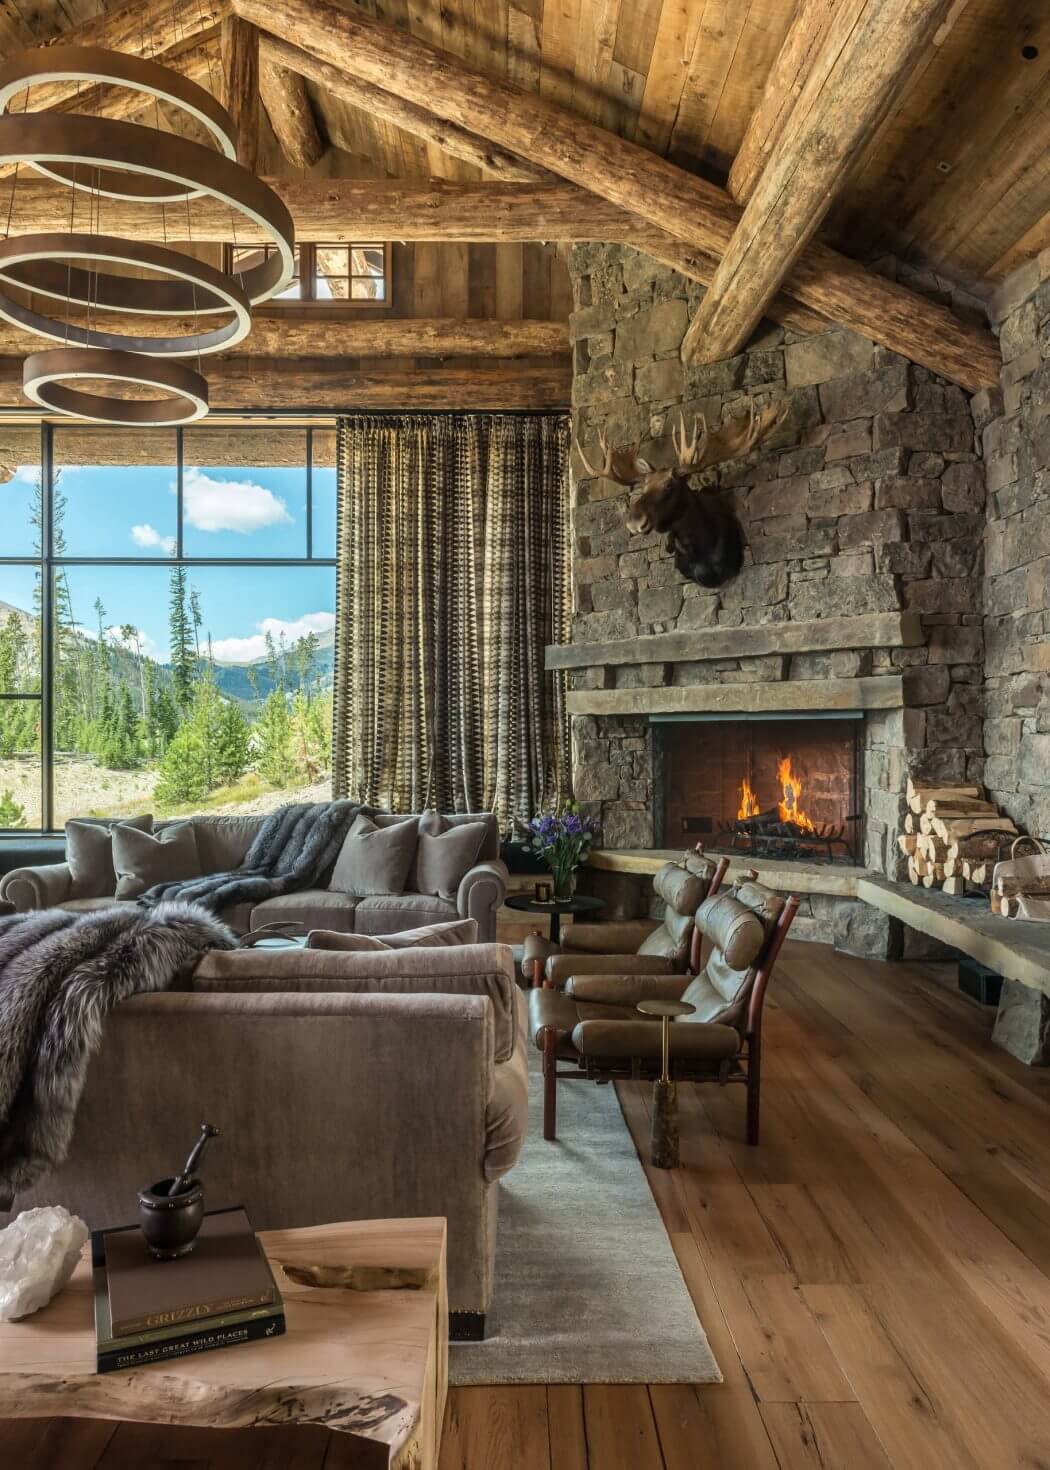 Rustic living room with stone fireplace, wooden beams, and cozy furnishings.